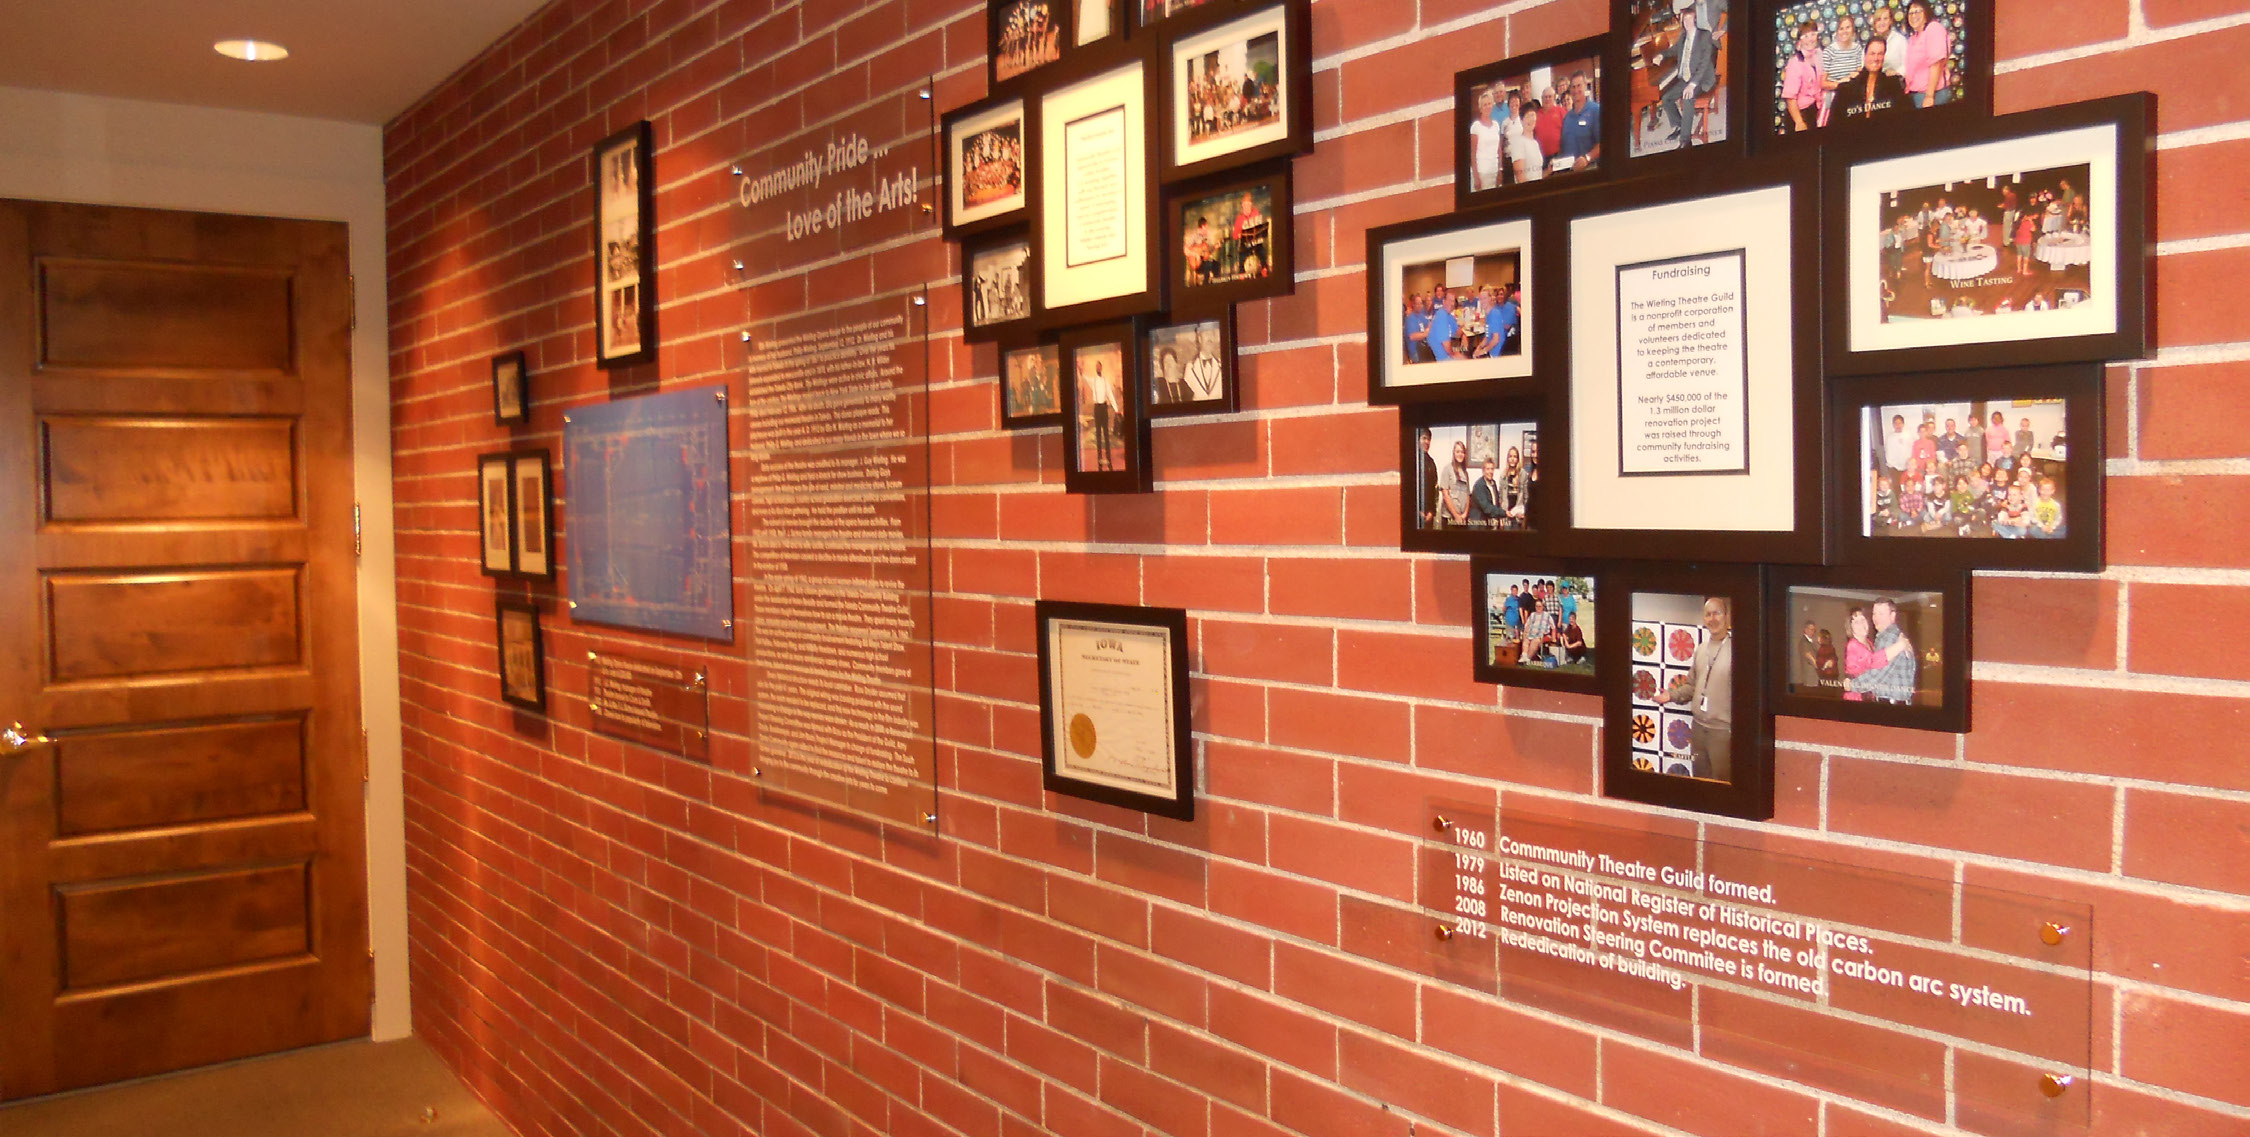 A wall in the Wieting's basement is devoted to the theatre's History. Photo courtesy of Abigail Evans